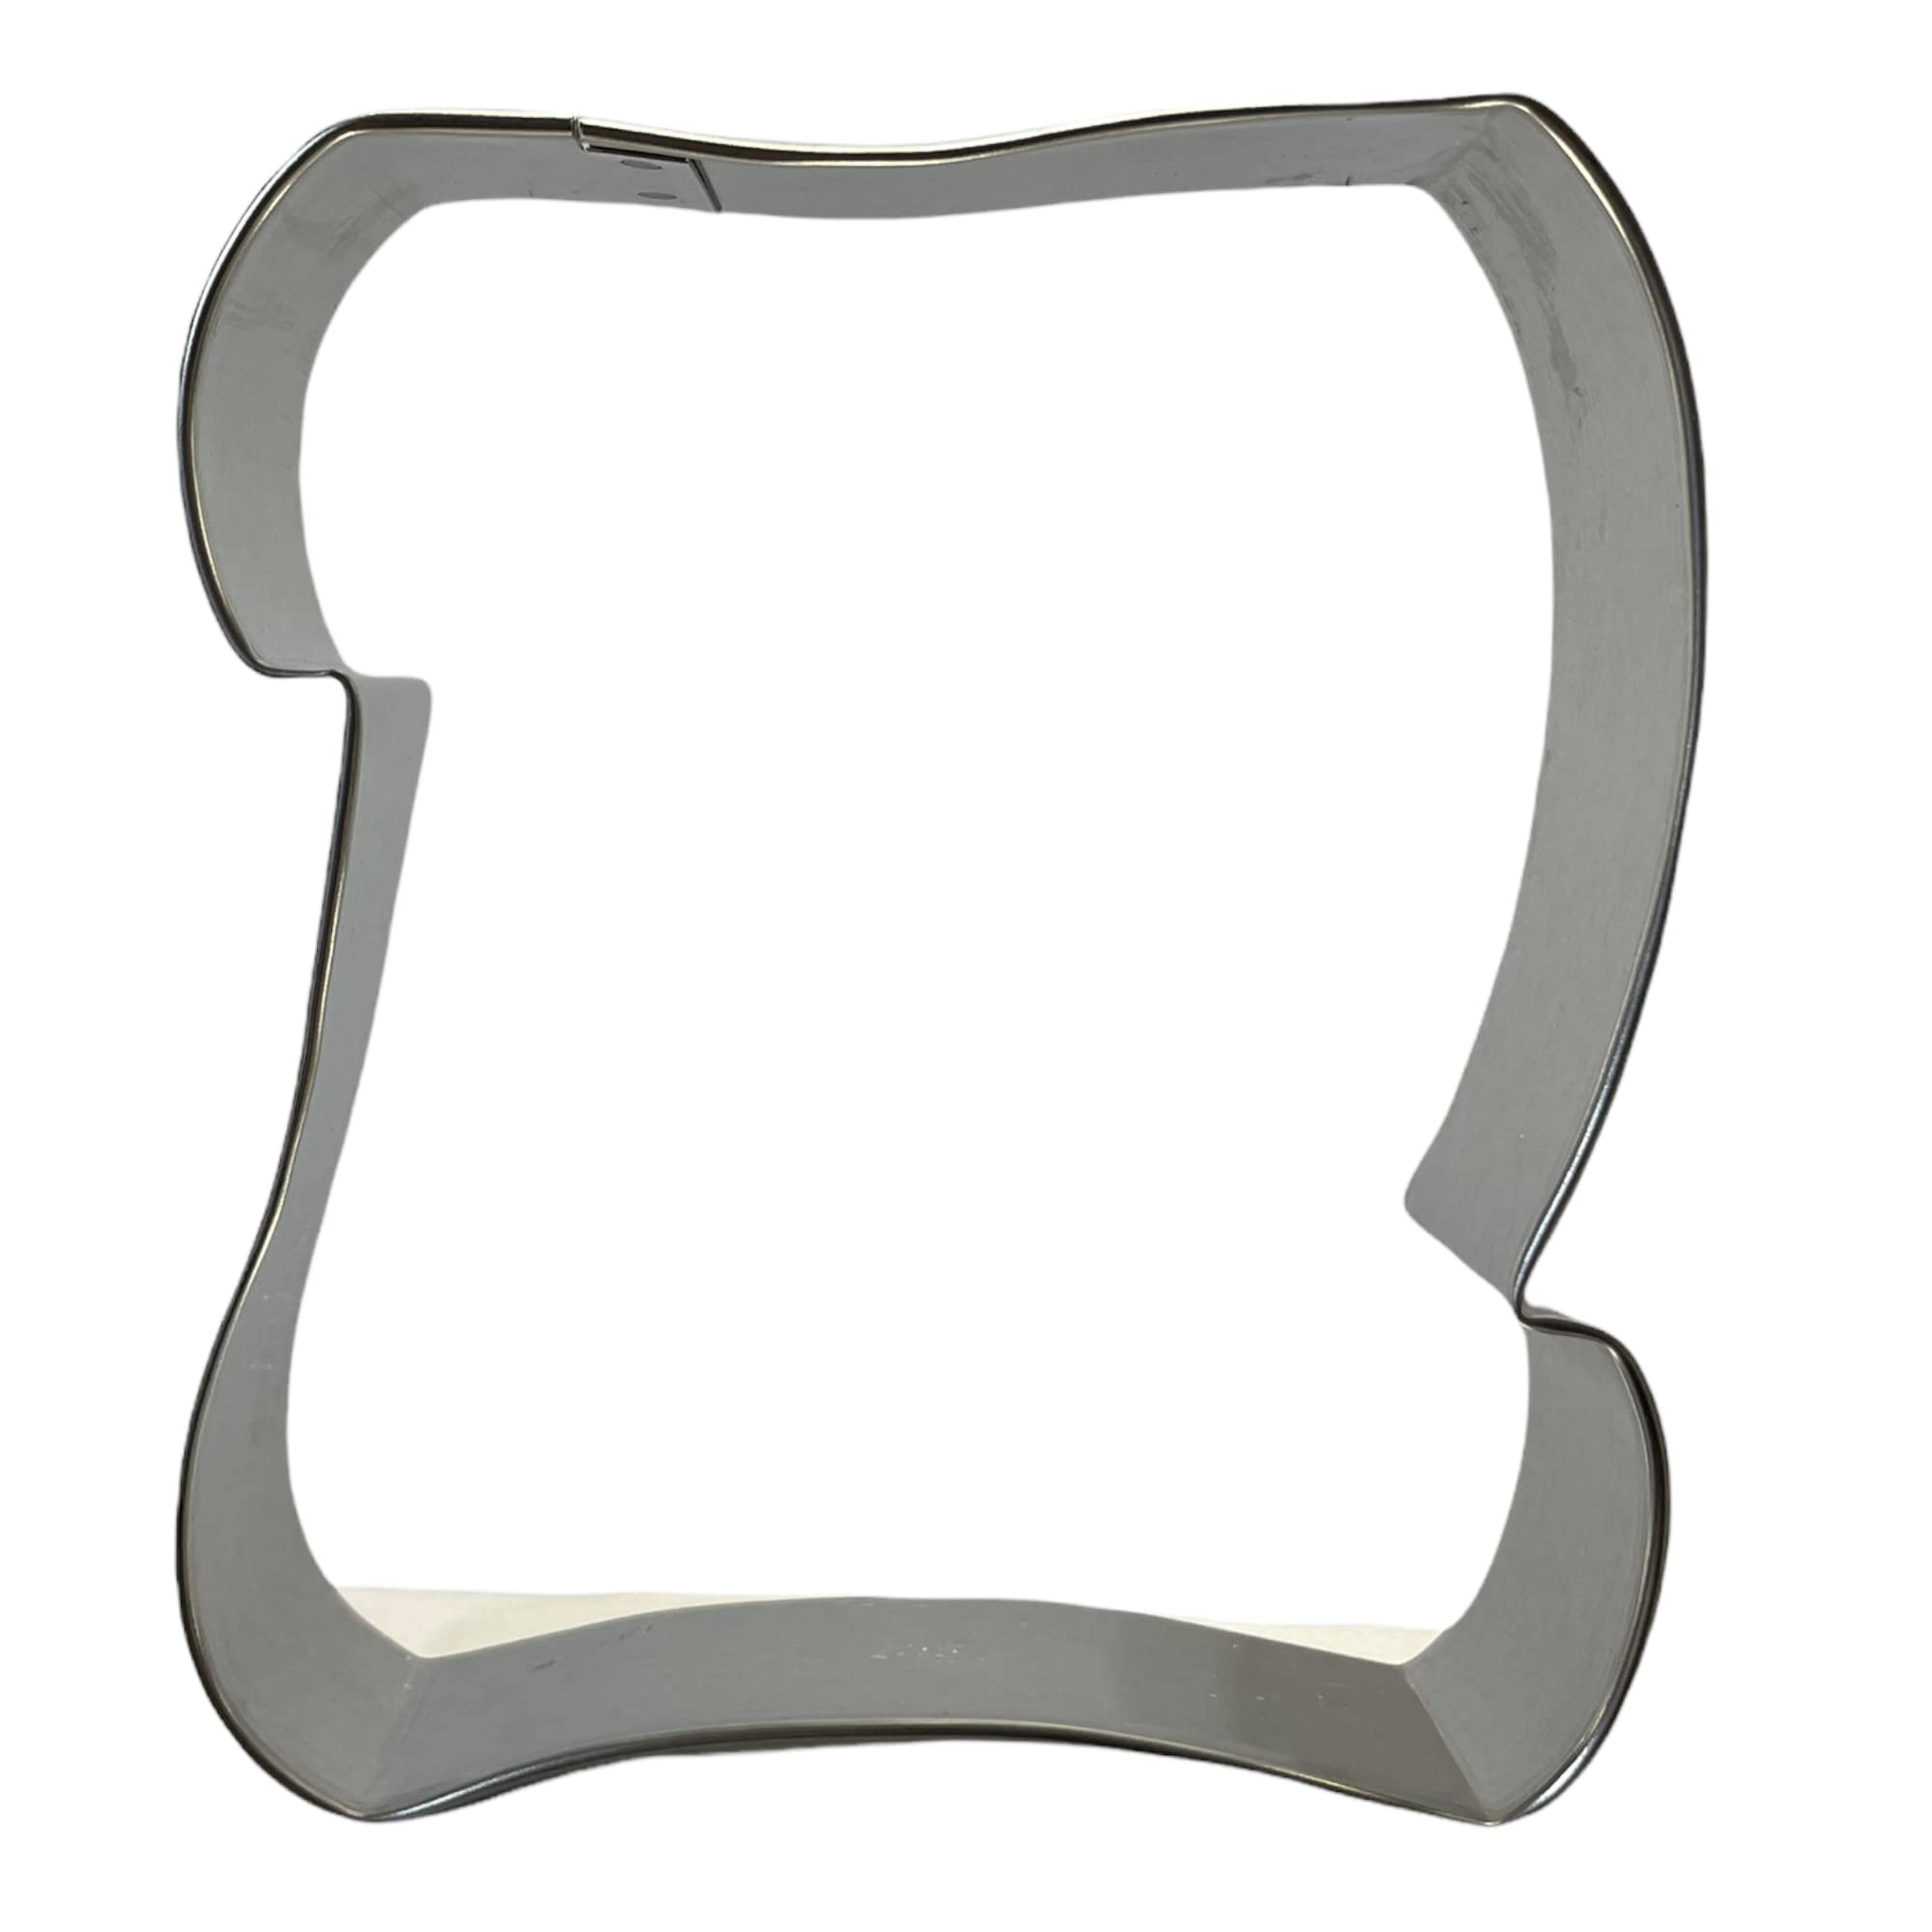 Ancient Paper Scroll Diploma Metal Cookie Cutter (5 inch)